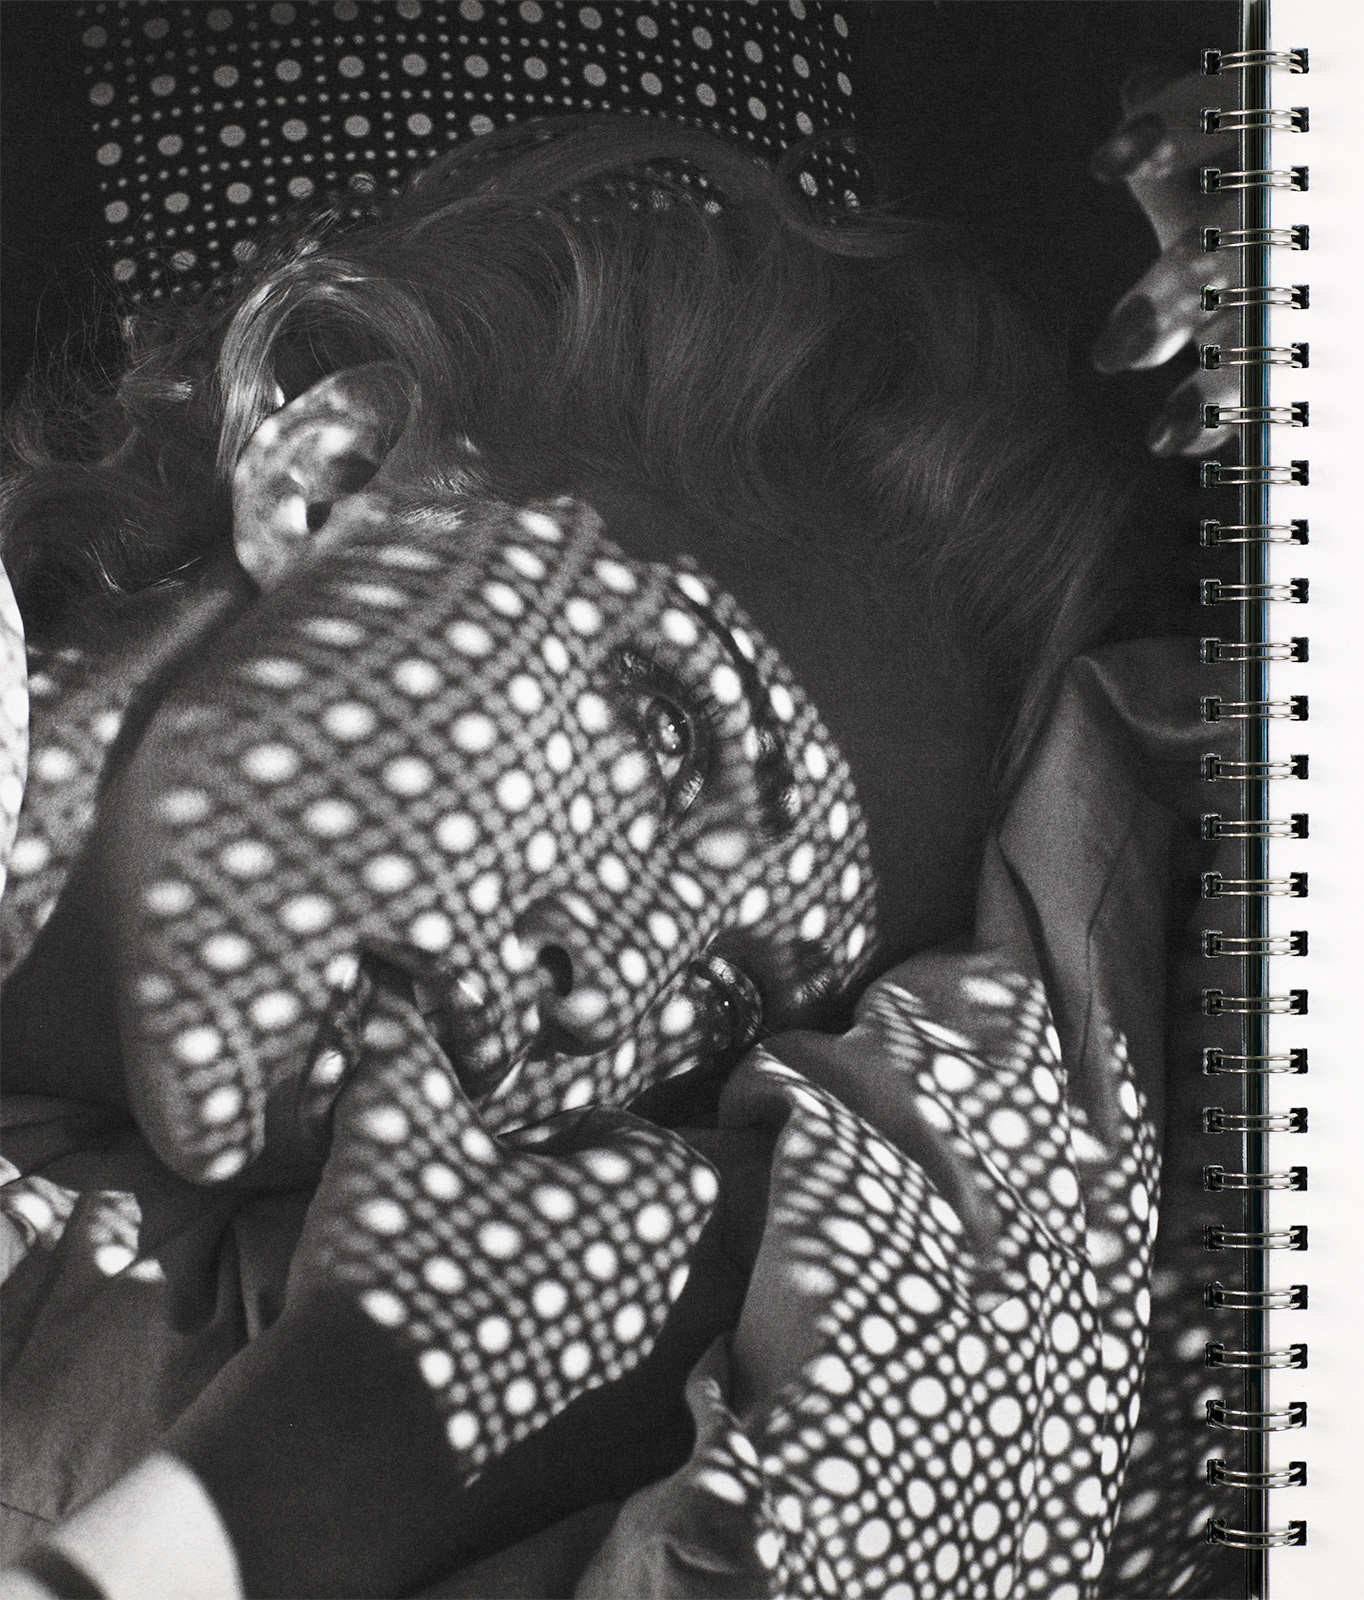 Page in Madonna’s Sex; photography by Steven Meisel; published by Warner Books, New York, 1992. Harvard Art Museums/Fogg Museum, Schneider Erdman Printer's Proof Collection, partial gift, and partial purchase through the Margaret Fisher Fund, 2016.133.